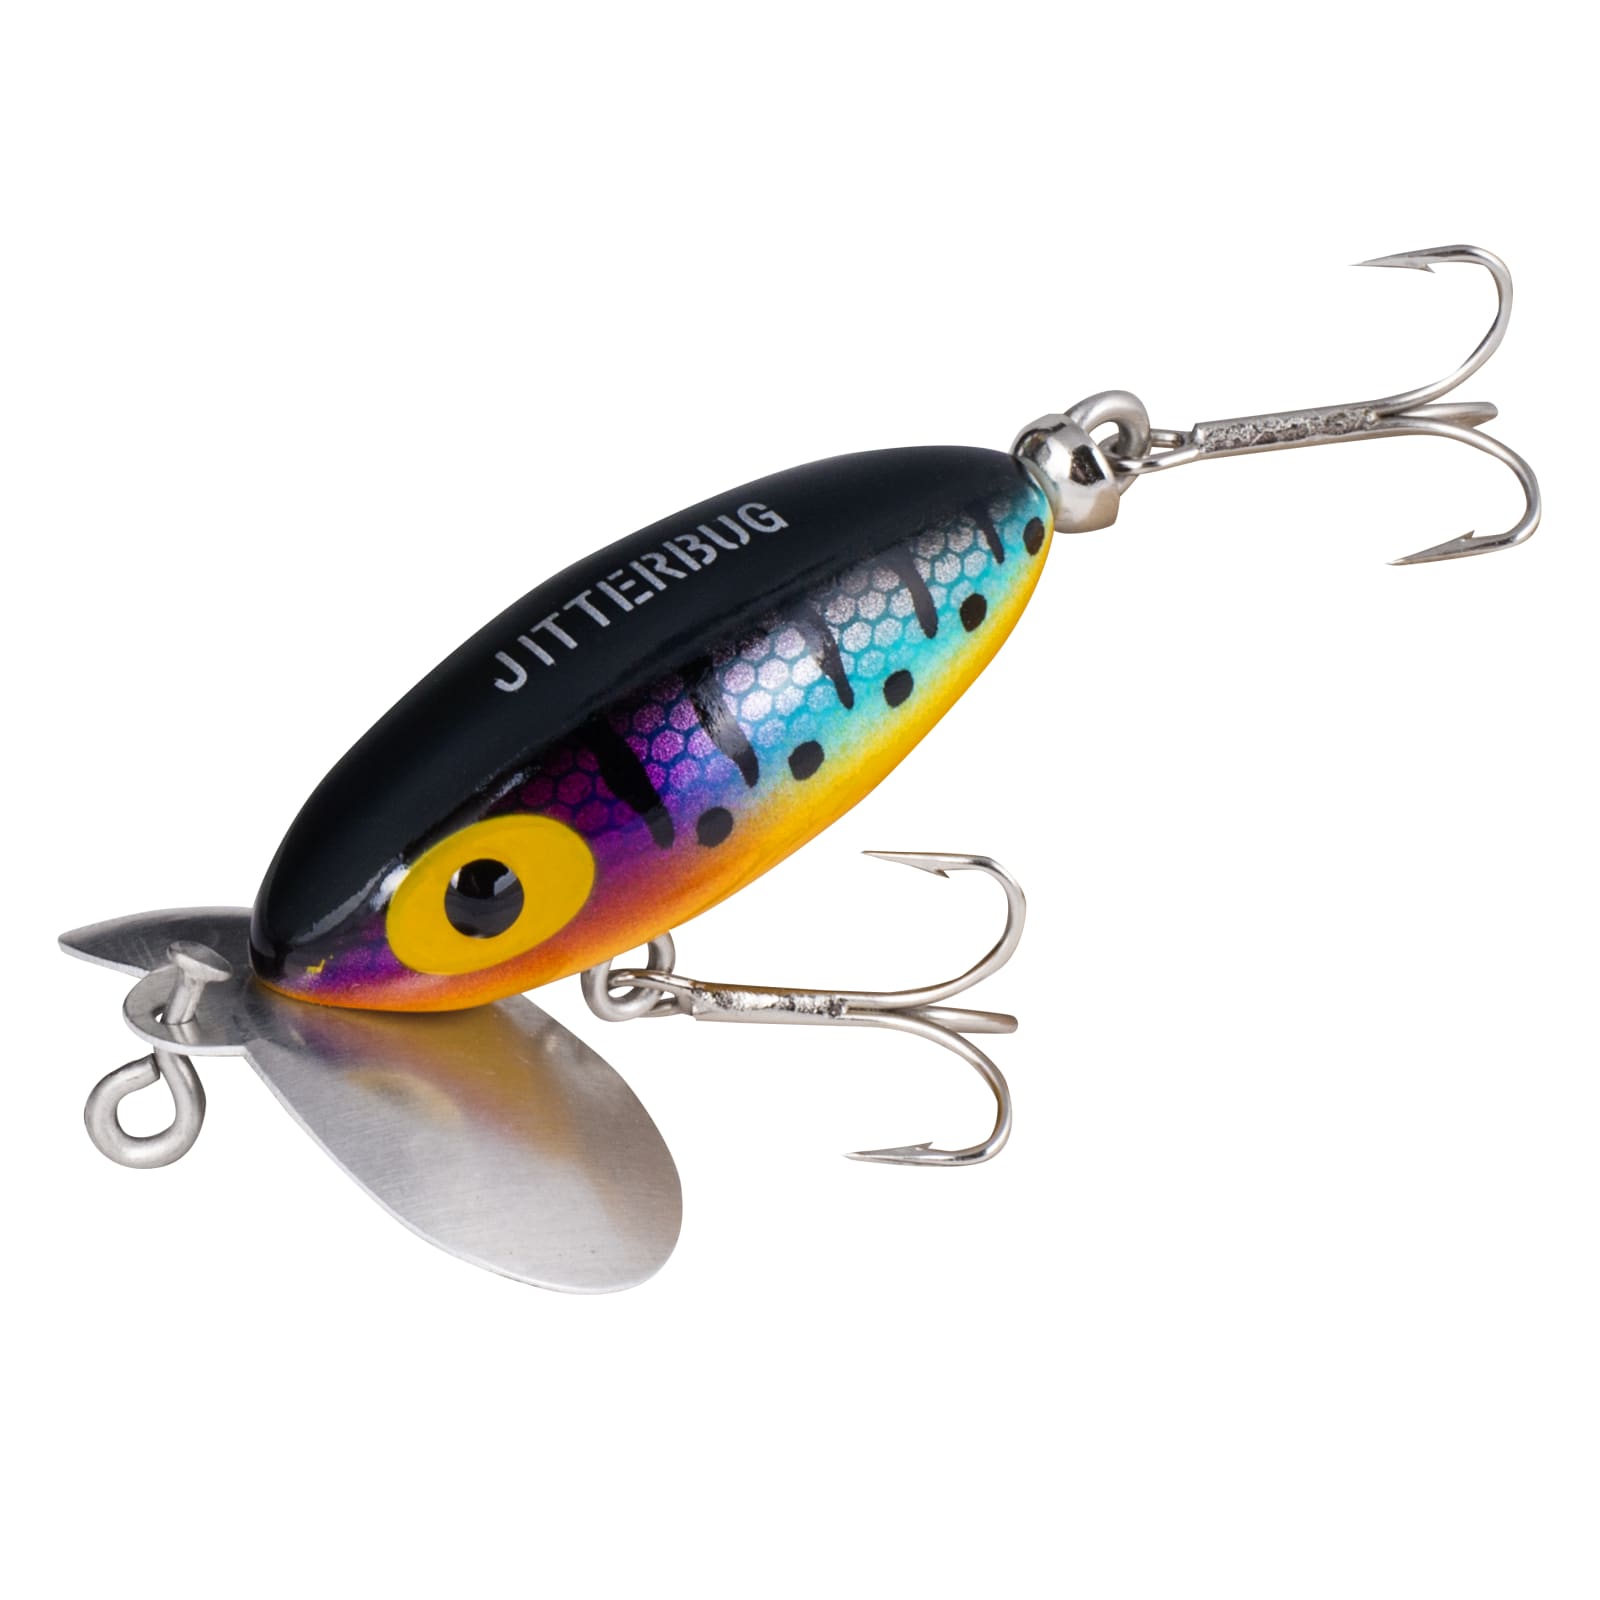 Arbogast Jitterbug Topwater Bass Fishing Lure, Excellent for Night Fishing,  